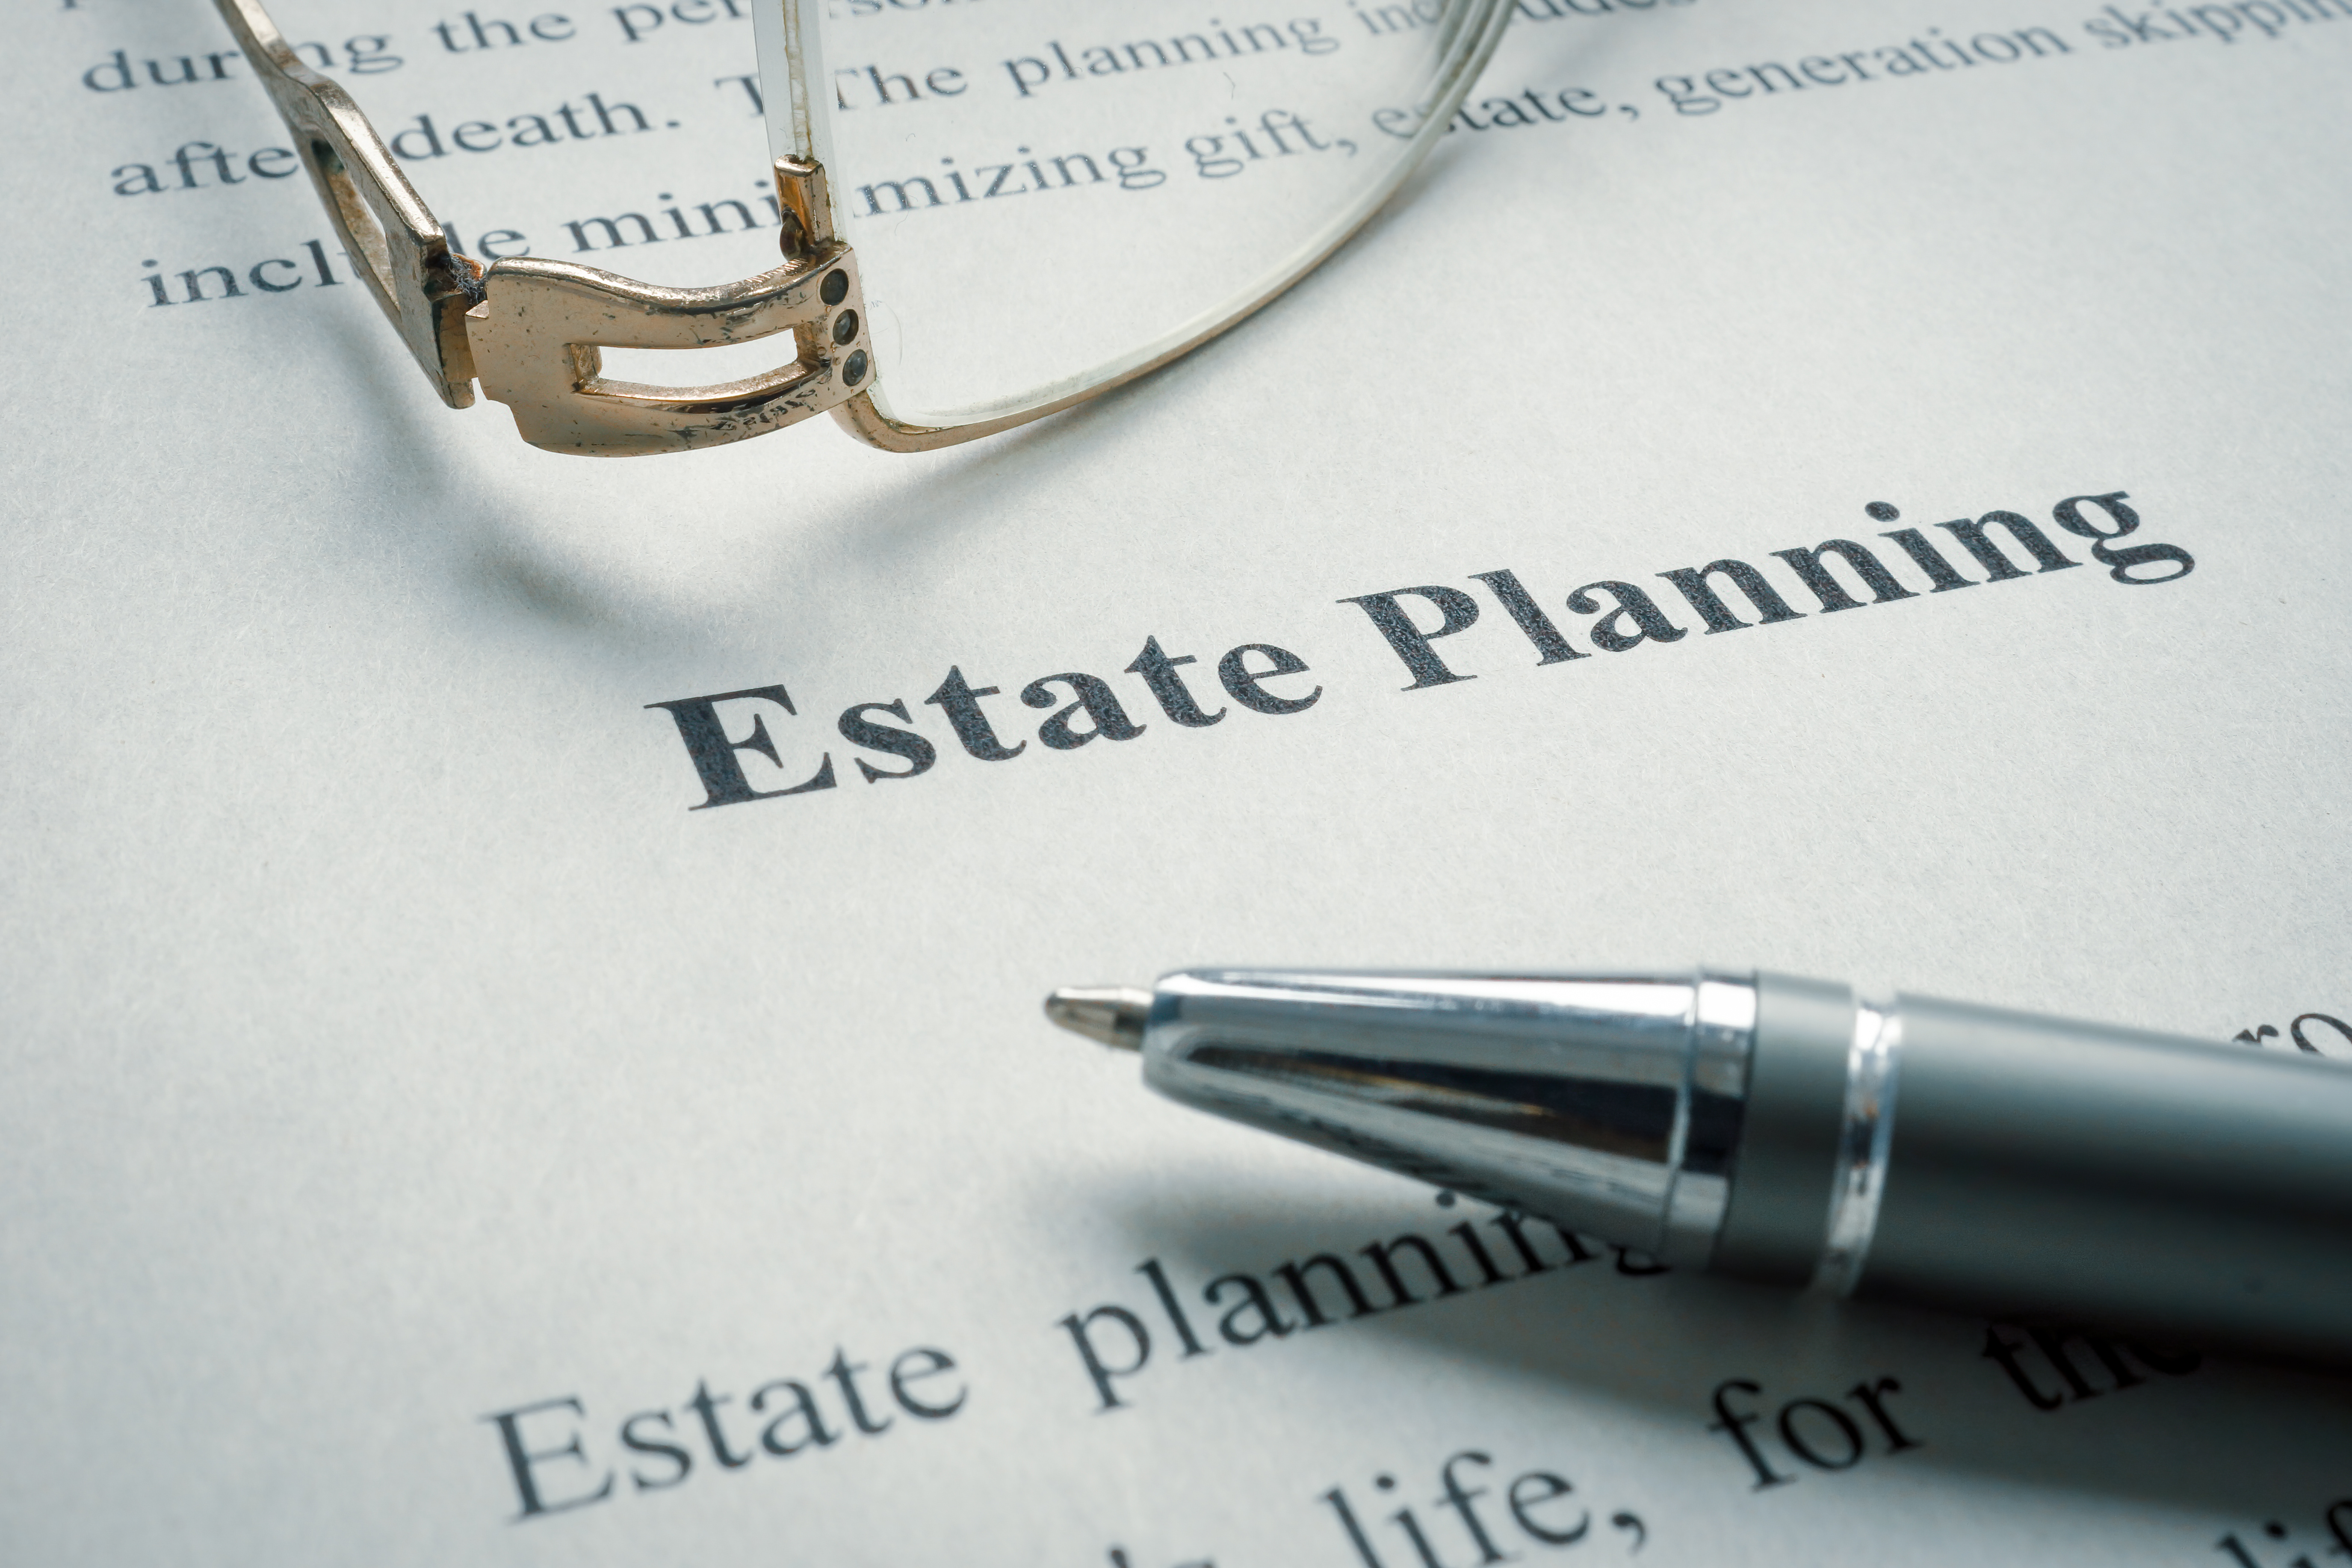 Estate Planning: An Introduction